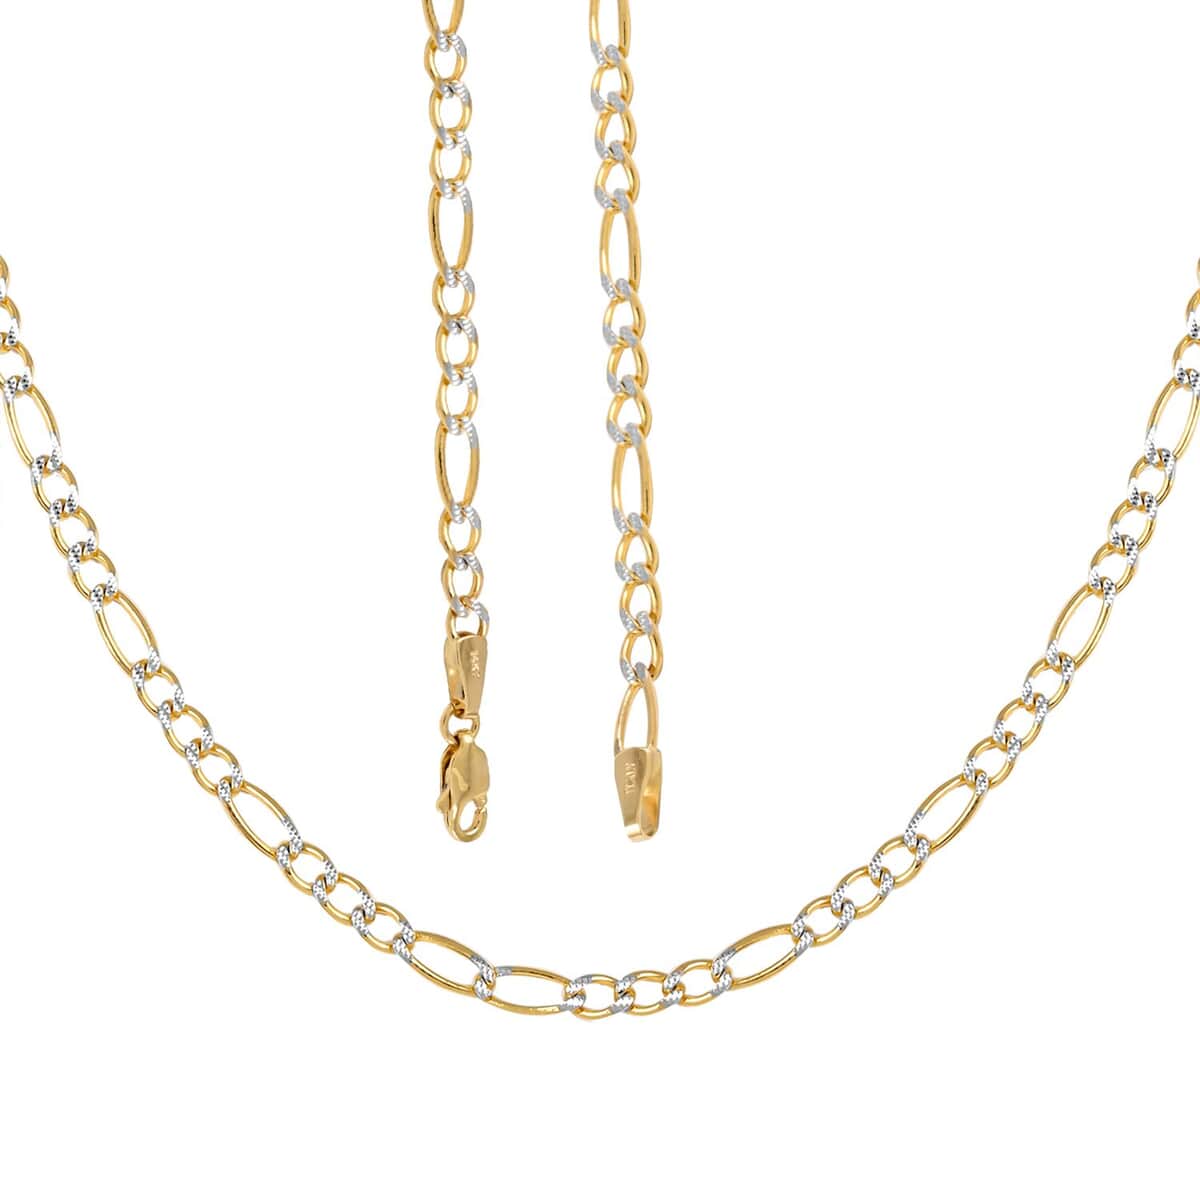 Maestro Gold Collection Italian 10K Yellow & White Gold Pave Figaro Necklace | Dual Tone Gold Figaro Chain Necklace | 18 Inches Chain Necklace | Gold Jewelry For Her 6.80 Grams image number 4